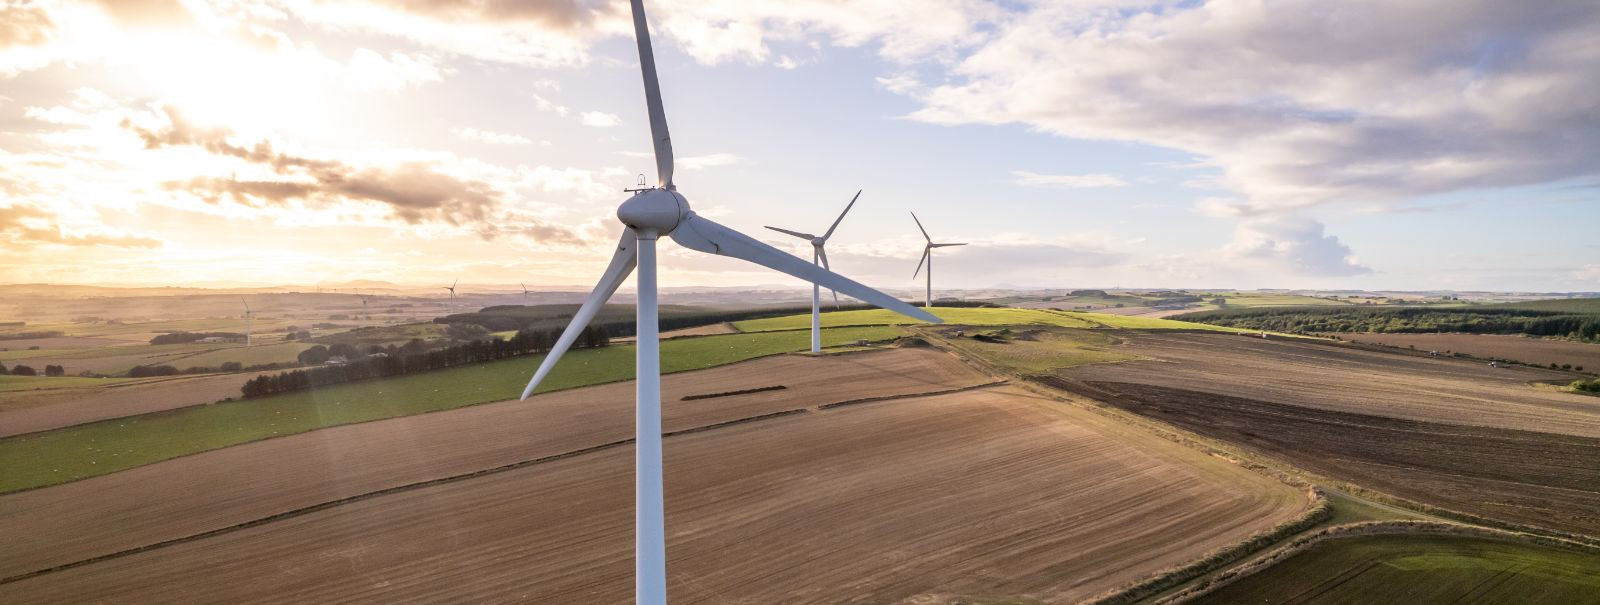 As the world grapples with the urgent need to reduce carbon emissions and combat climate change, renewable energy sources like wind power have become increasing